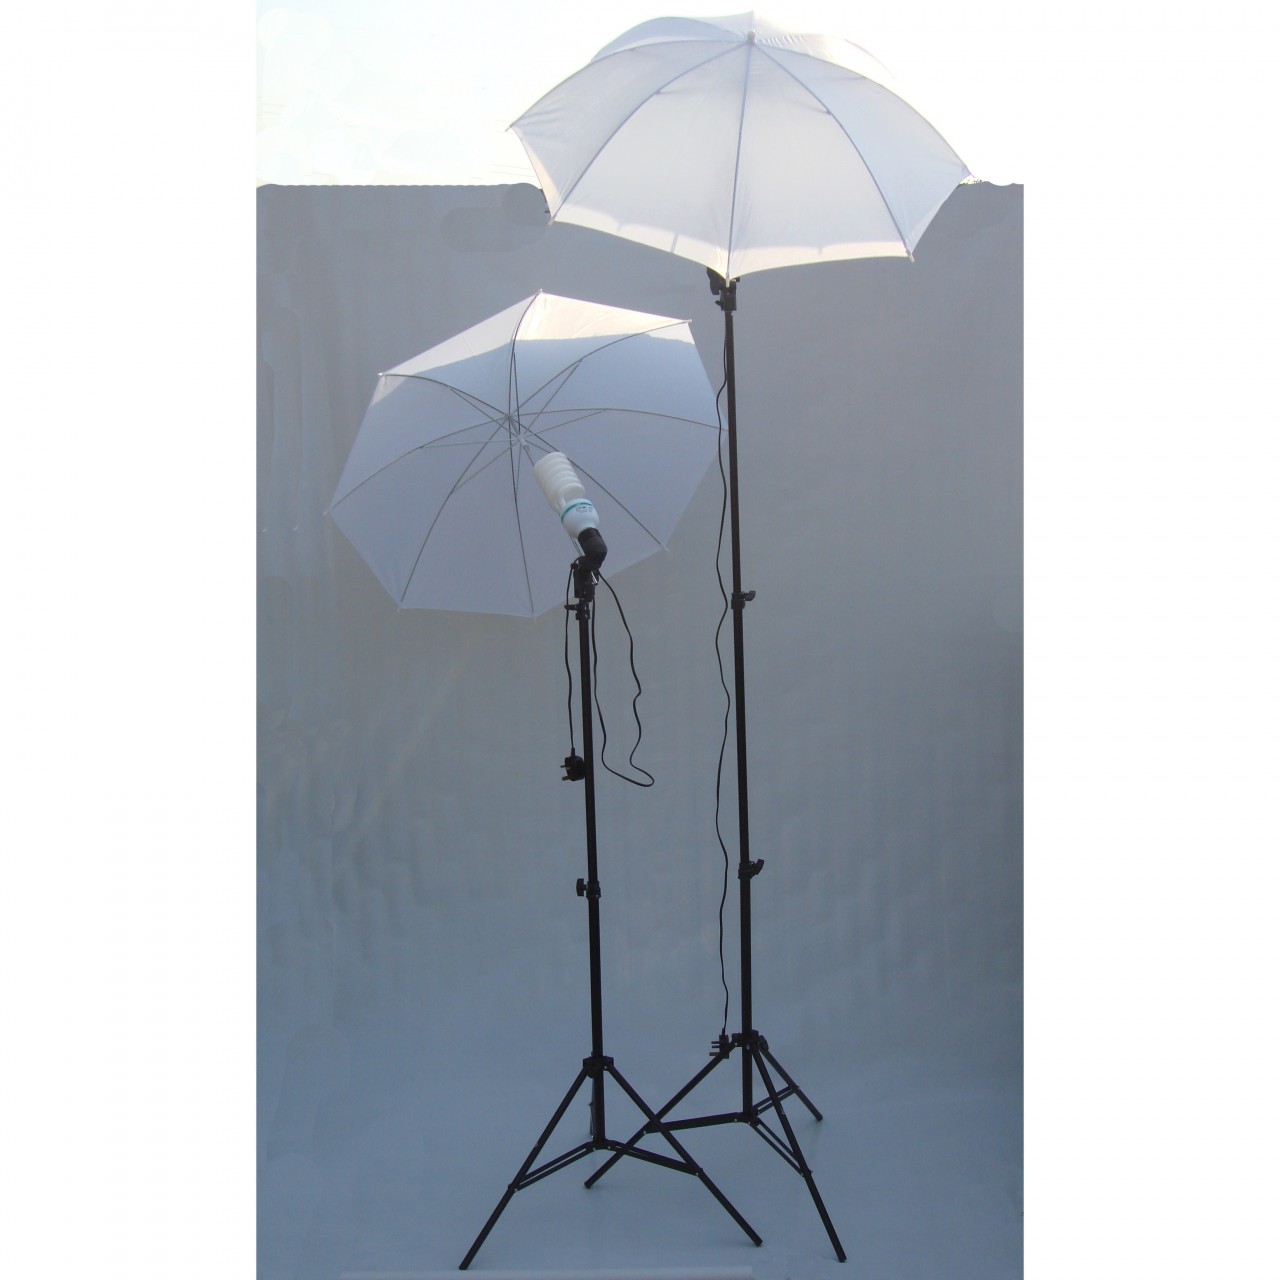 Umbrella continuous Lights setup pair for photography and video shooting